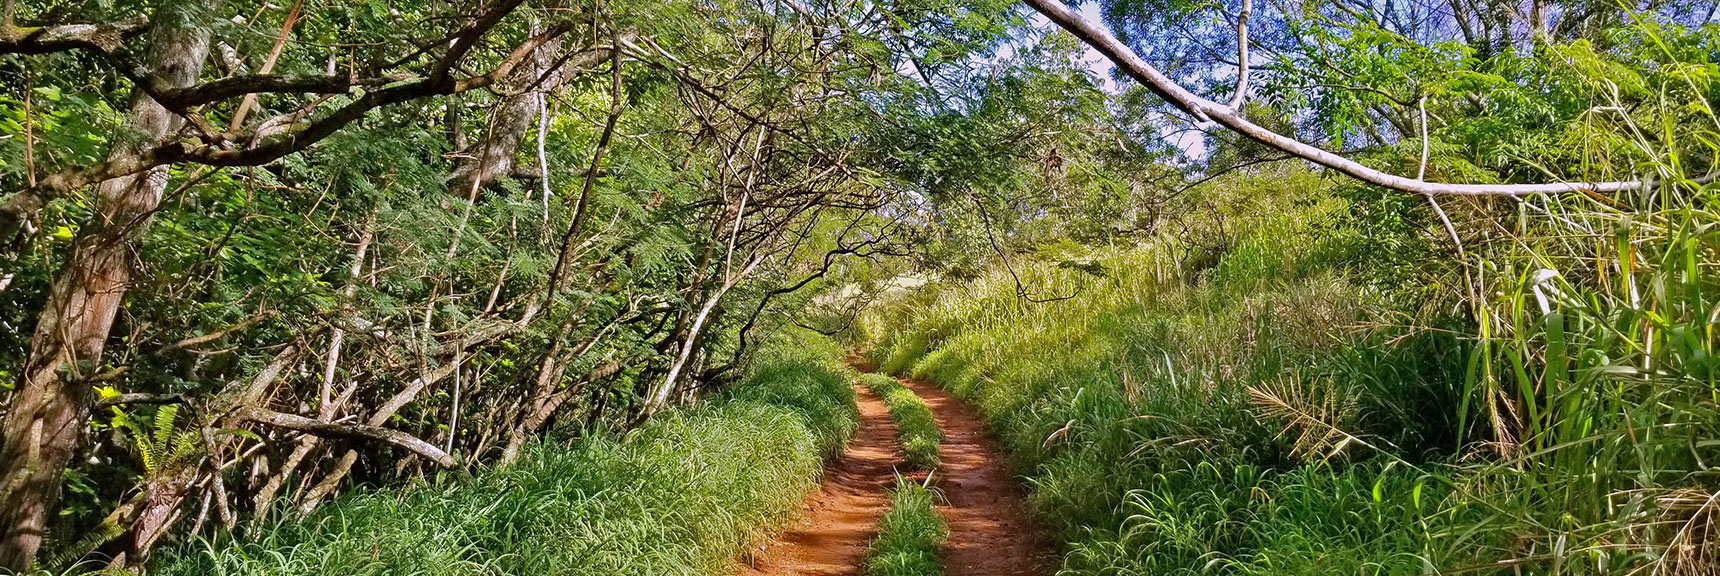 Passing Through Jungle at Base of Middle Gorge (Pulepule Gulch?). Trail Entrance Branches Off Road | Hidden Hills and Jungle Above Kahana in West Maui, Hawaii